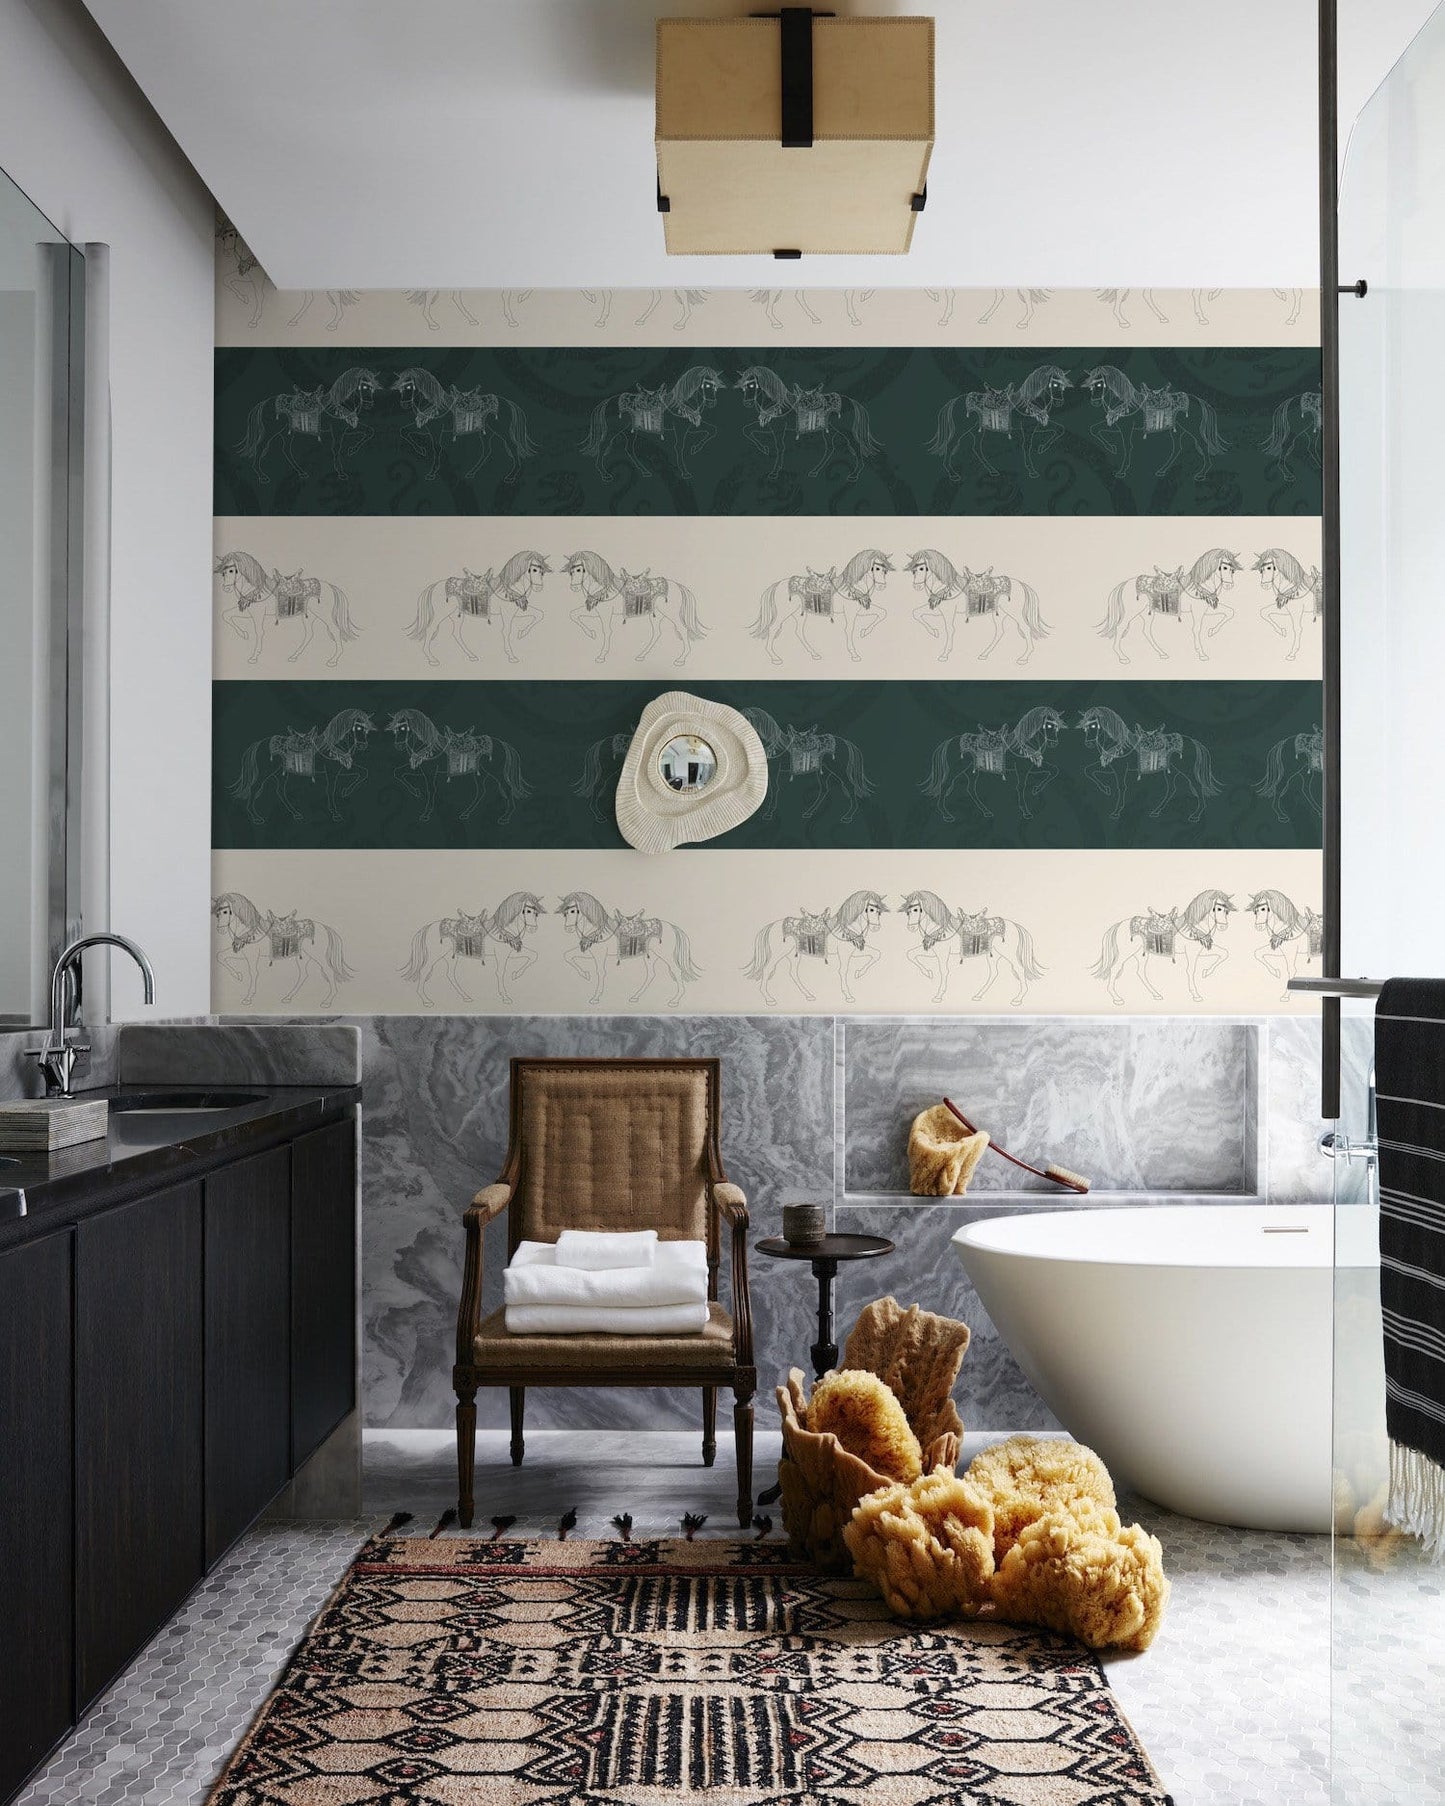 Animal Horse Couple Wallpaper Mural for Use as Decoration in Bathrooms